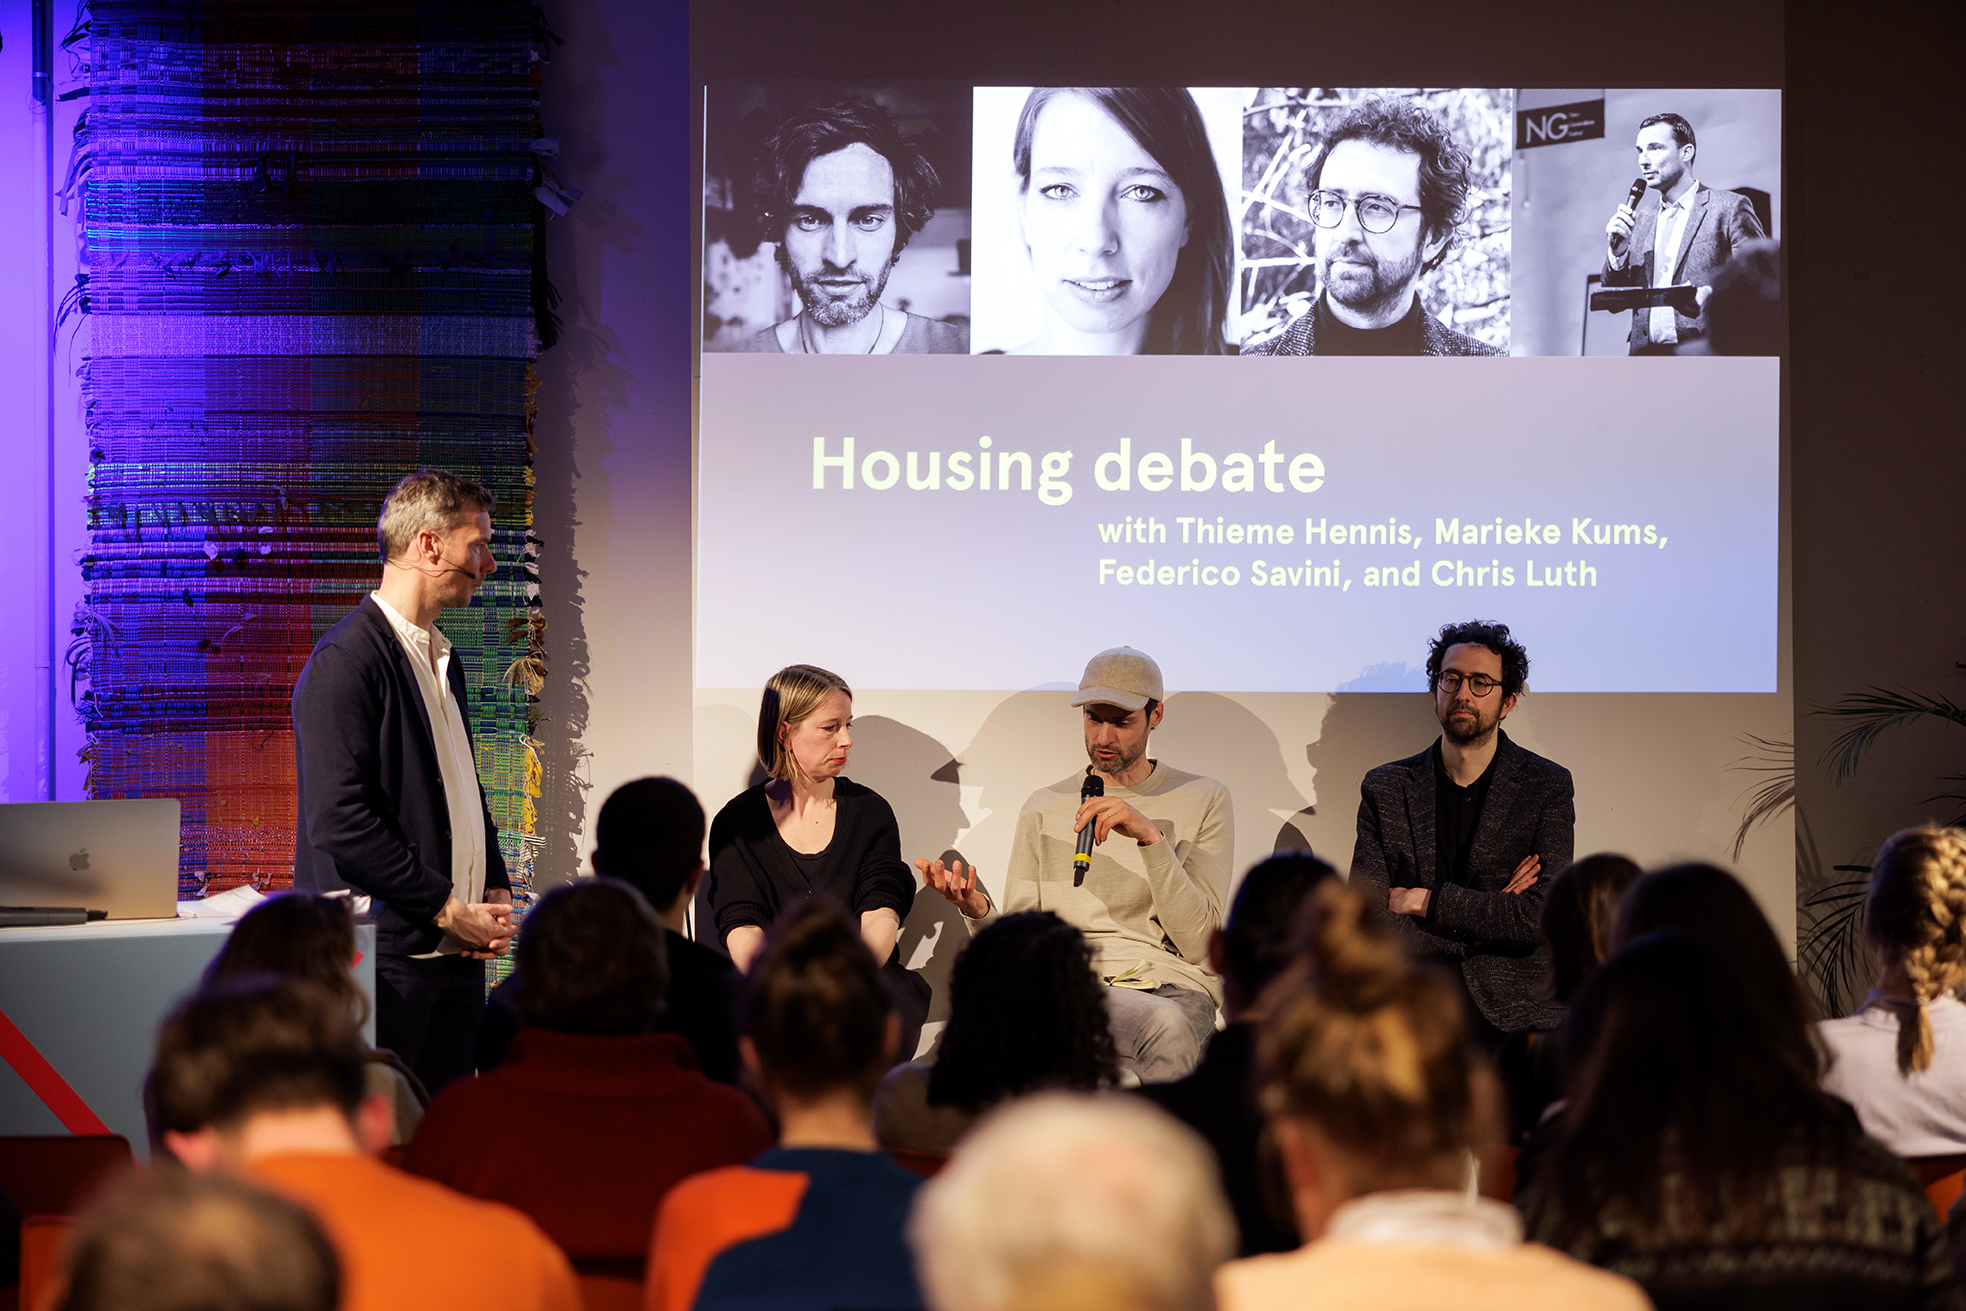 Housing debate: Alternatives to Ownership, Debate with the speakers and the audience. From the left: Chris Luth, Marieke Kums, Thieme Hennis, Federico Savini. Independent School for the City, Rotterdam. Photo: Aad Hoogendoorn.